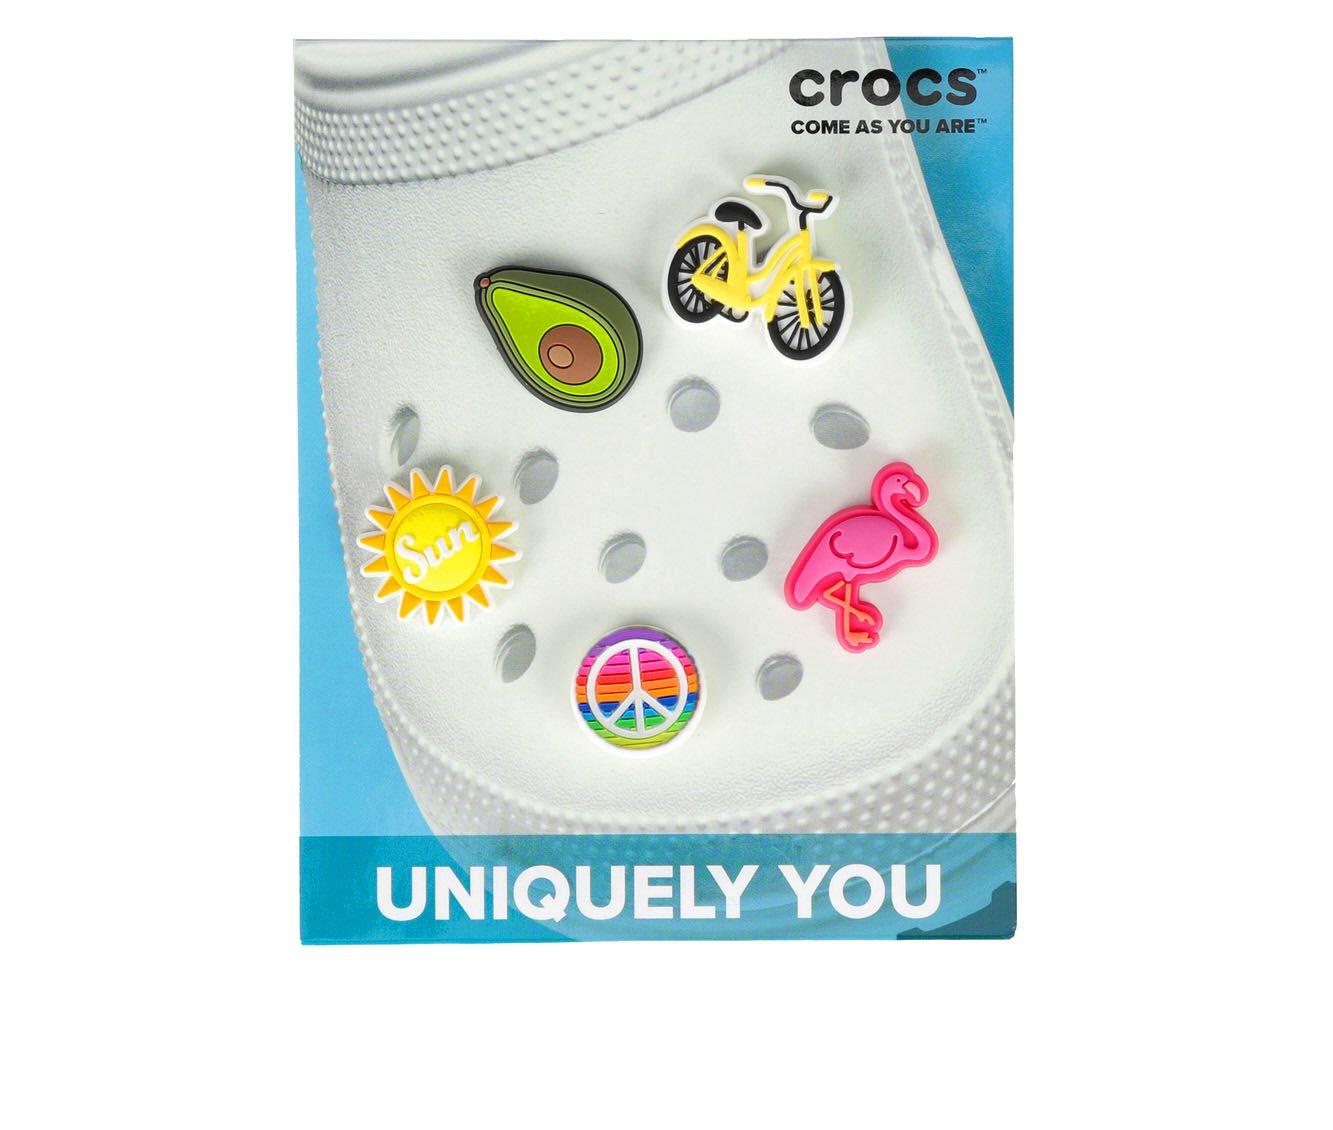 We have so many crocs and croc charms to have y'all fully loaded